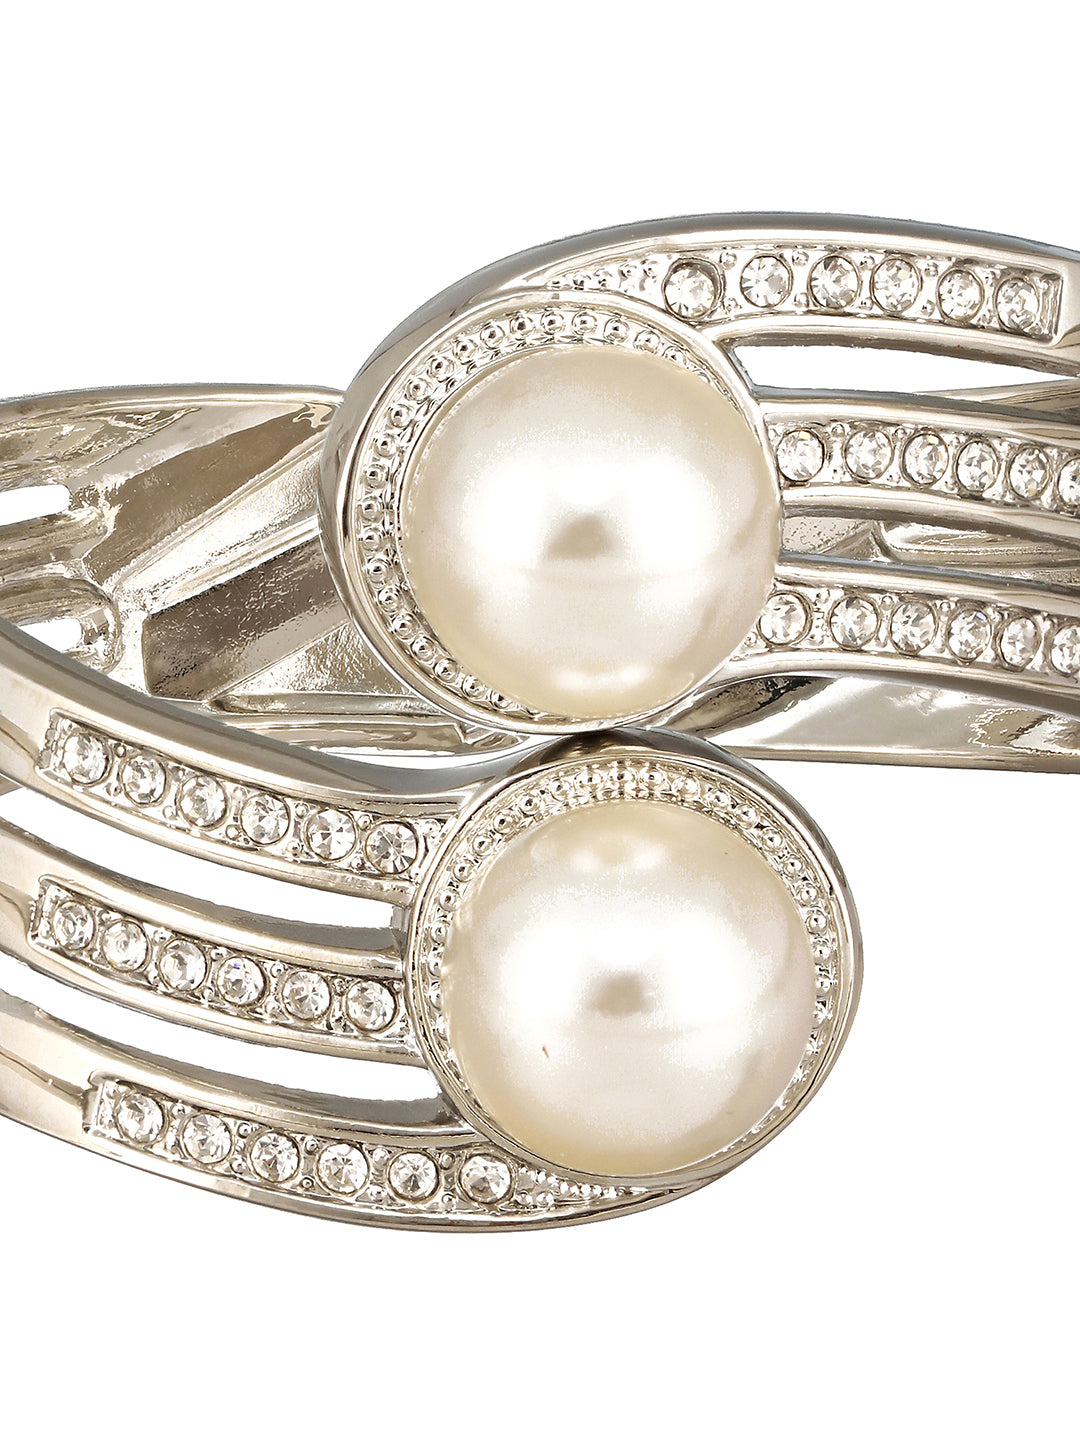 JAZZ AND SIZZLE Silver-Plated CZ Studded White Pearls Cuff Bracelet - Jazzandsizzle